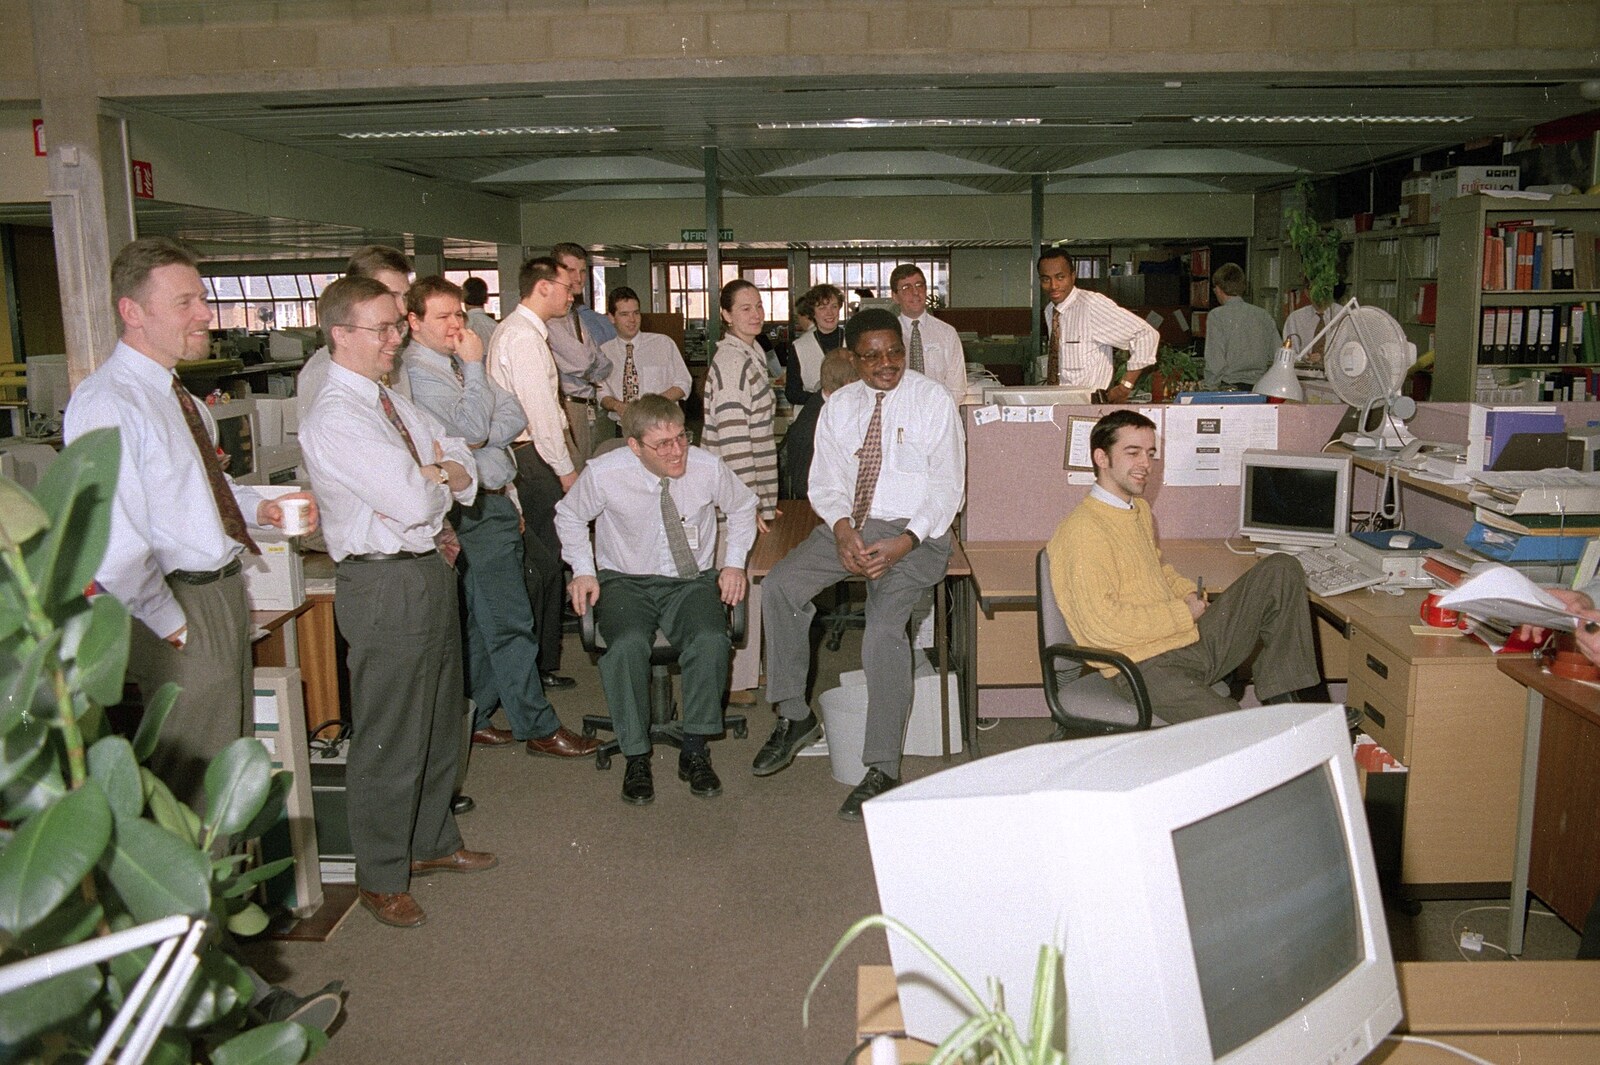 Campbell Leaves CISU, Suffolk County Council, Ipswich, Suffolk - 4th May 1996: Most of CISU gather to send Campbell off